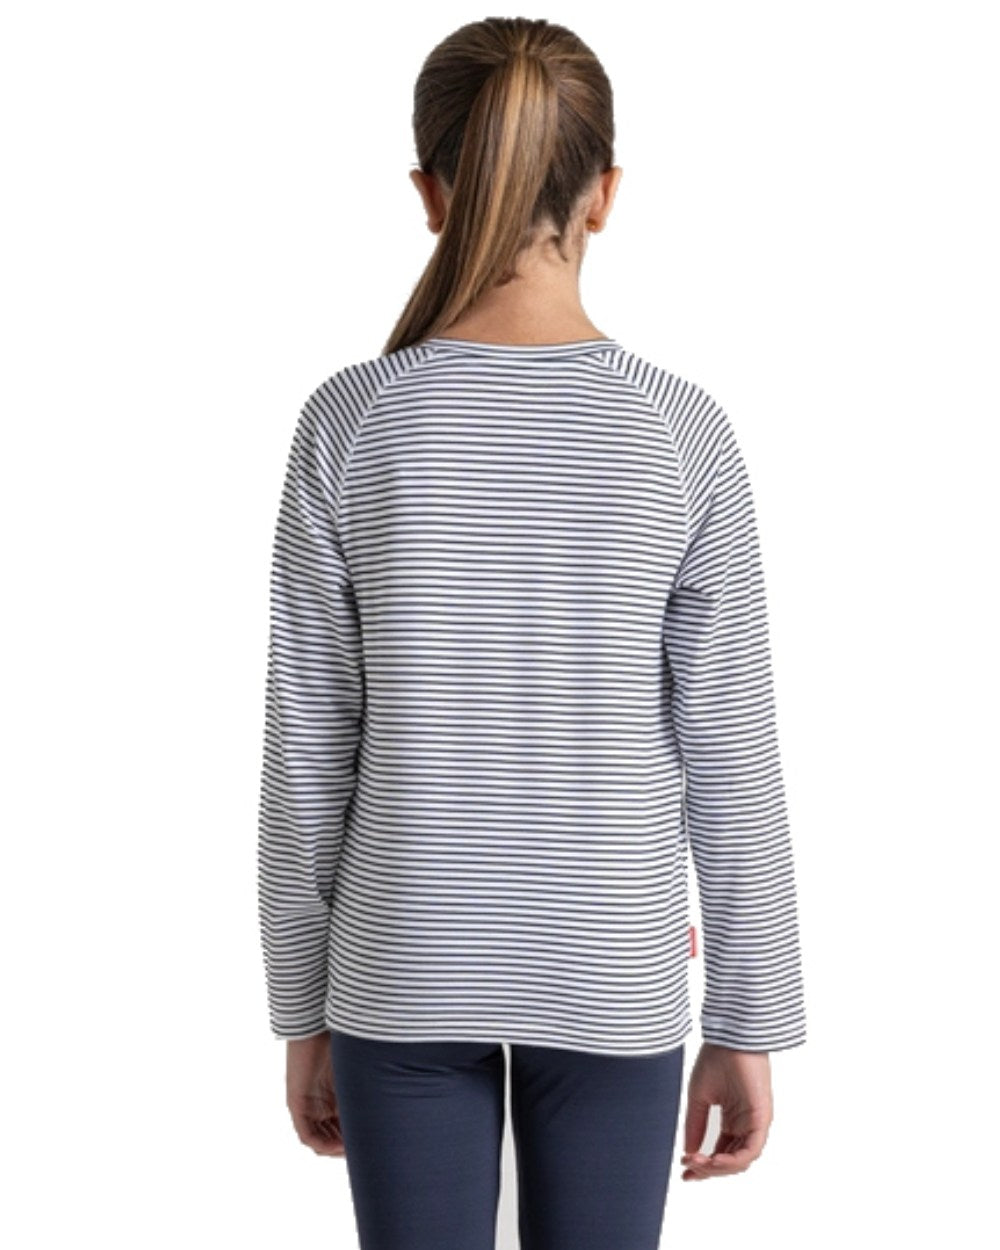 Blue Navy Stripe Coloured Craghoppers Childrens NosiLife Paola Long Sleeved T-Shirt On A White Background 